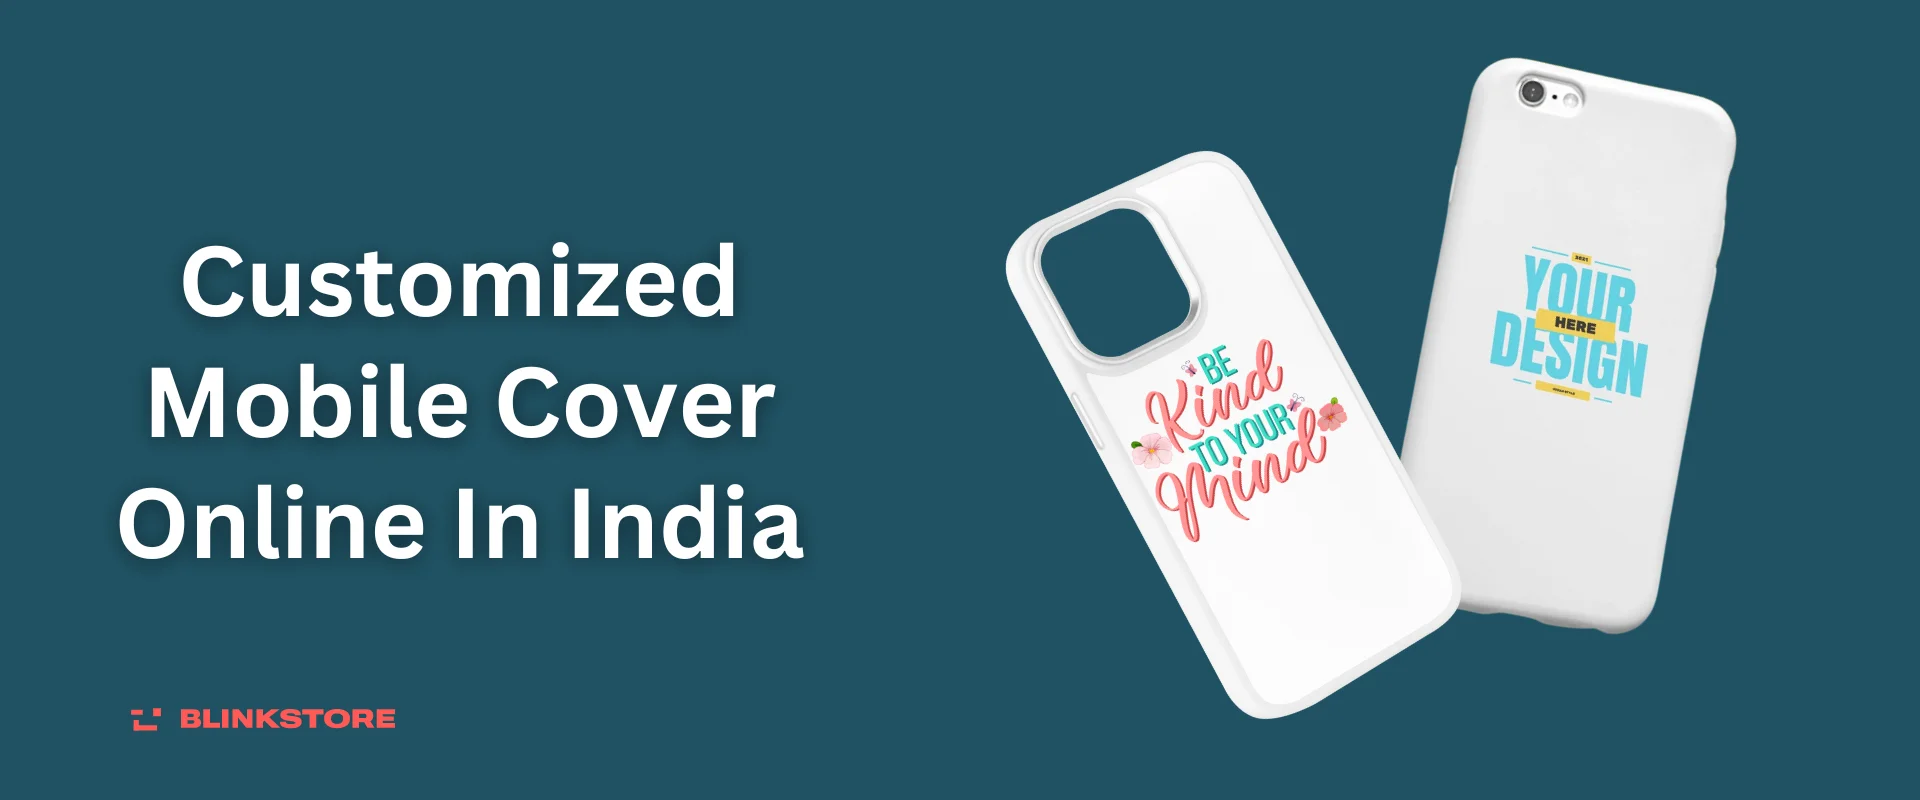 Customized Mobile Cover Online in India